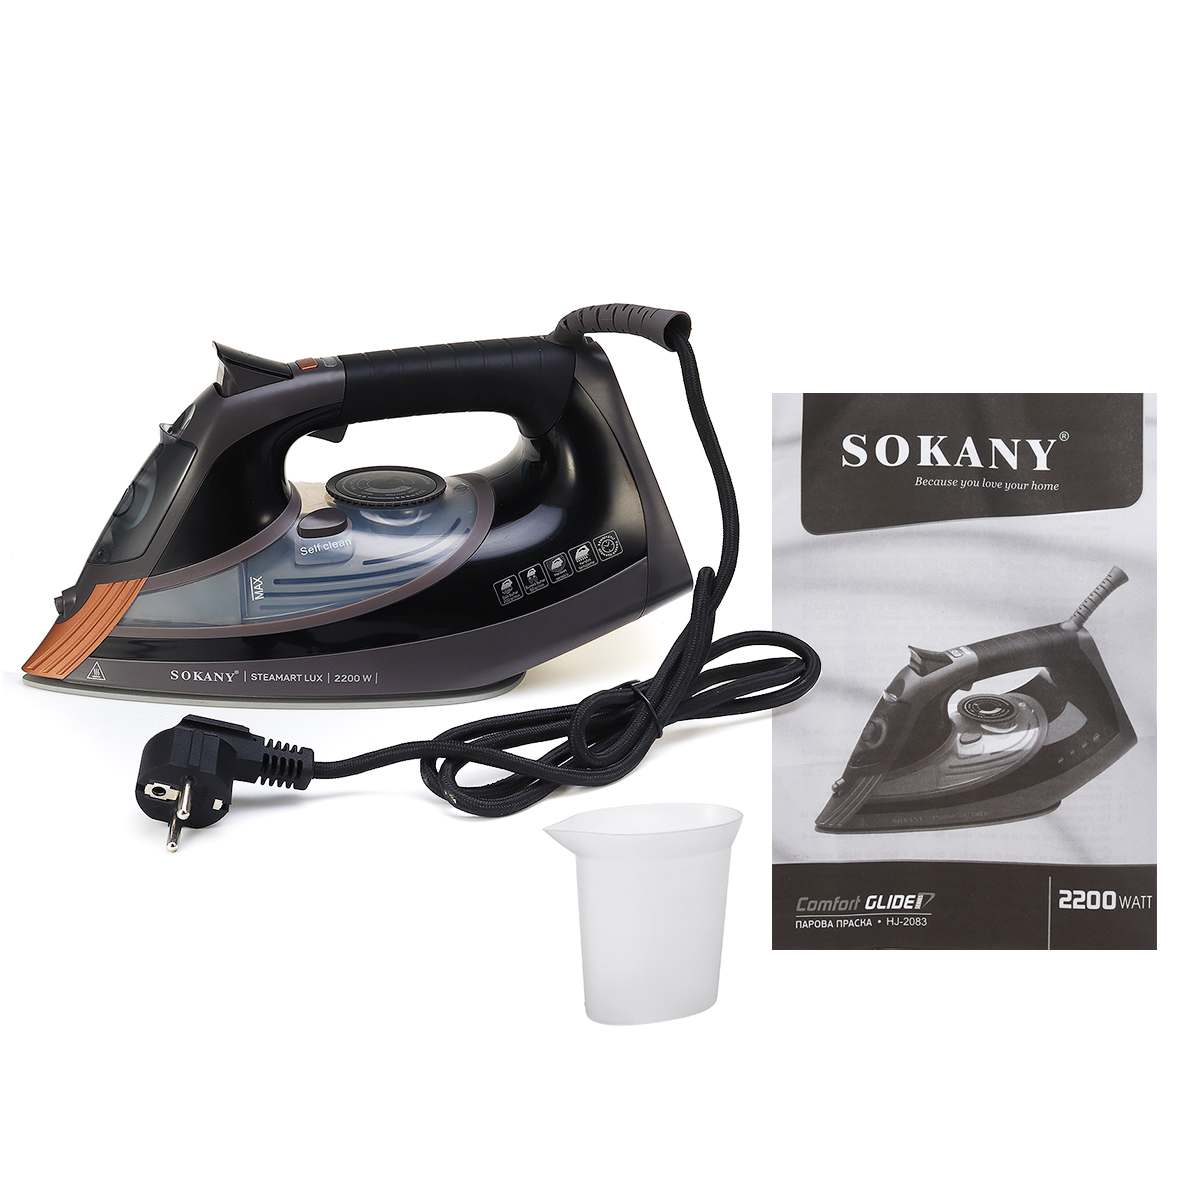 Electric Irons Garment Iron 2200W 220V Adjustable Steam Irons Clothing Laundry Appliance Clothes Irons Flatiron Multifunction